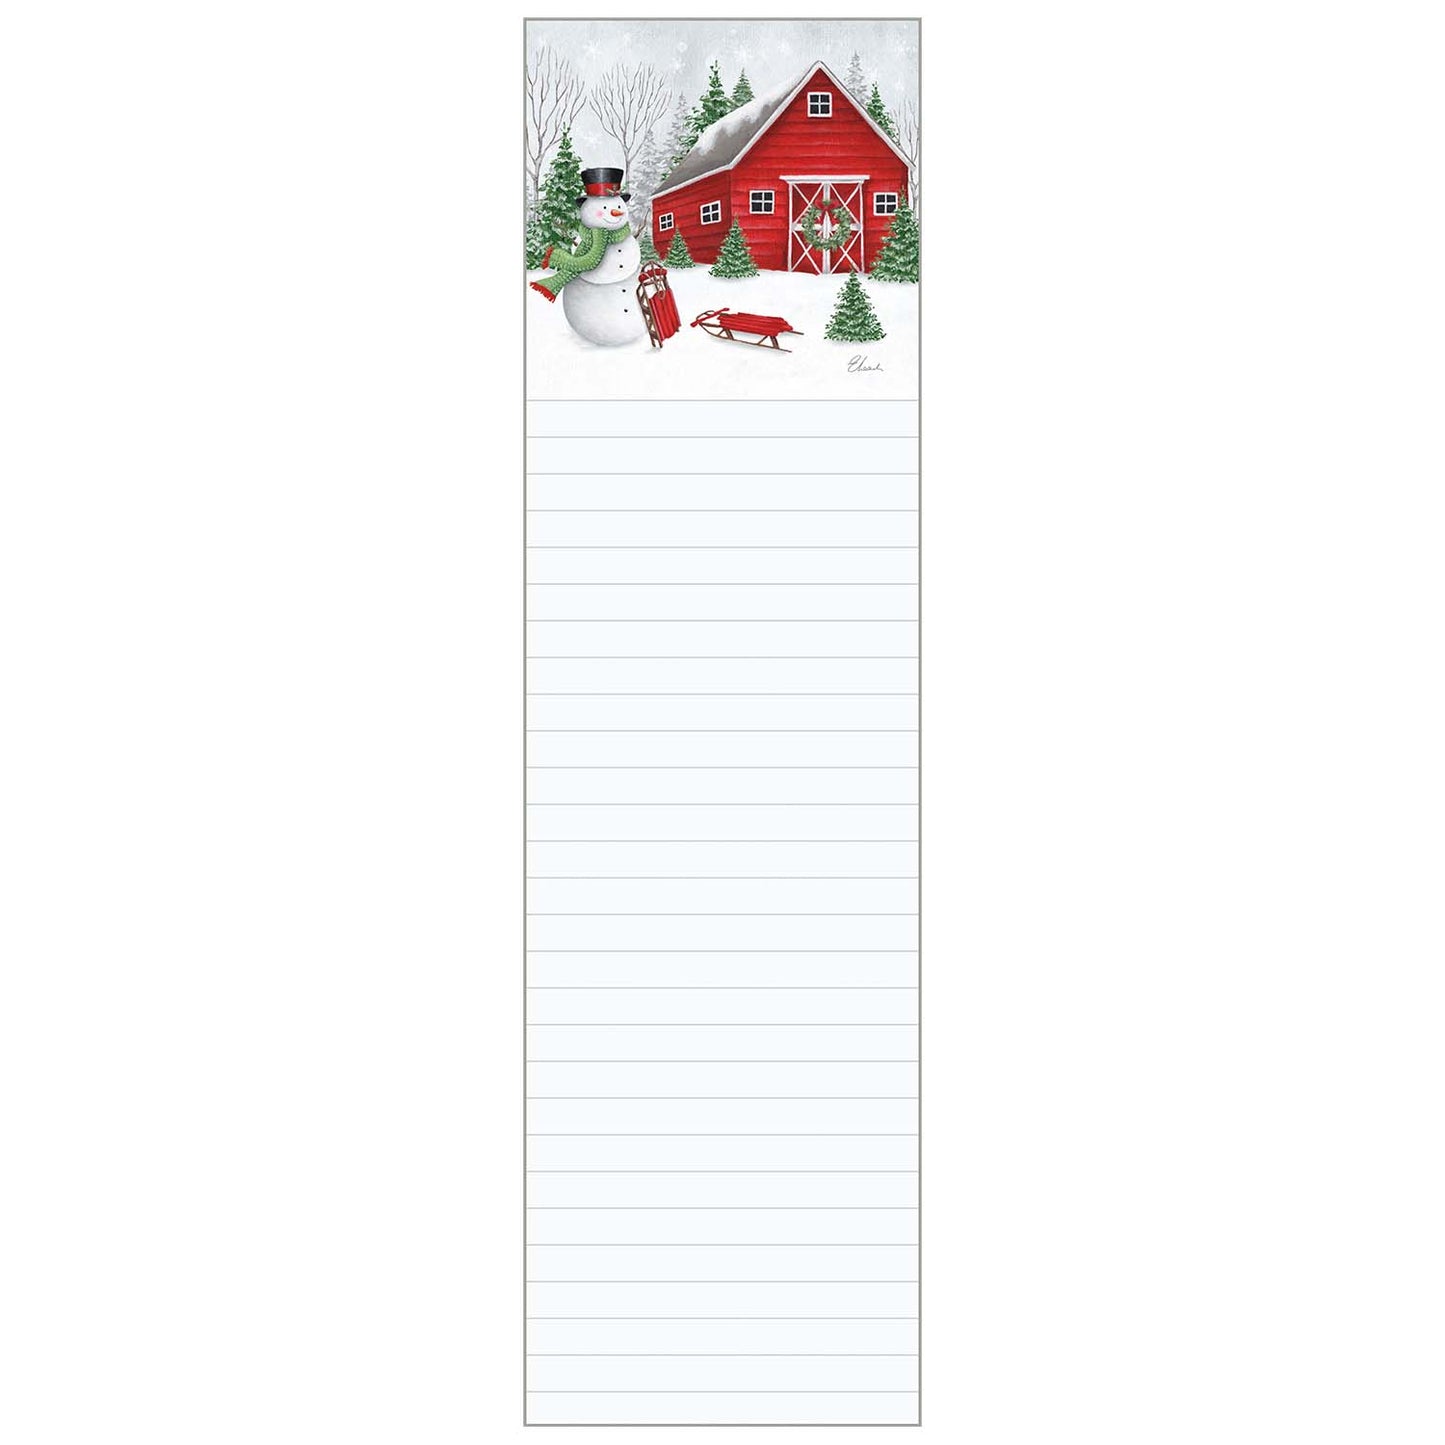 Snowman With Sleds at Barn Magnetic Listpad